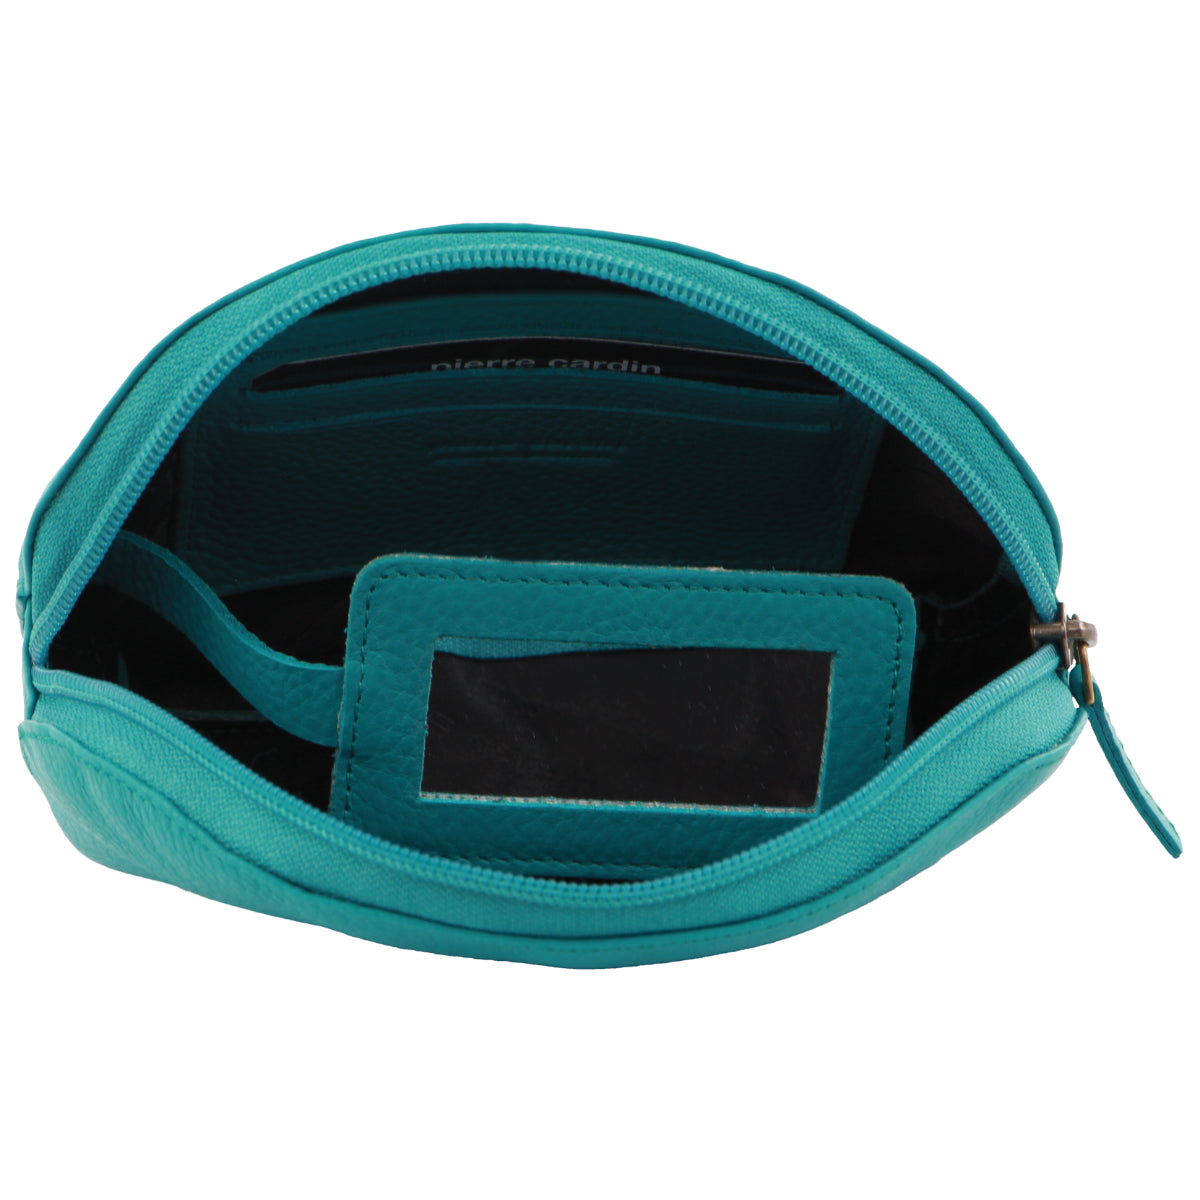 Pierre Cardin Leather Ladies Coin Purse in Turquoise